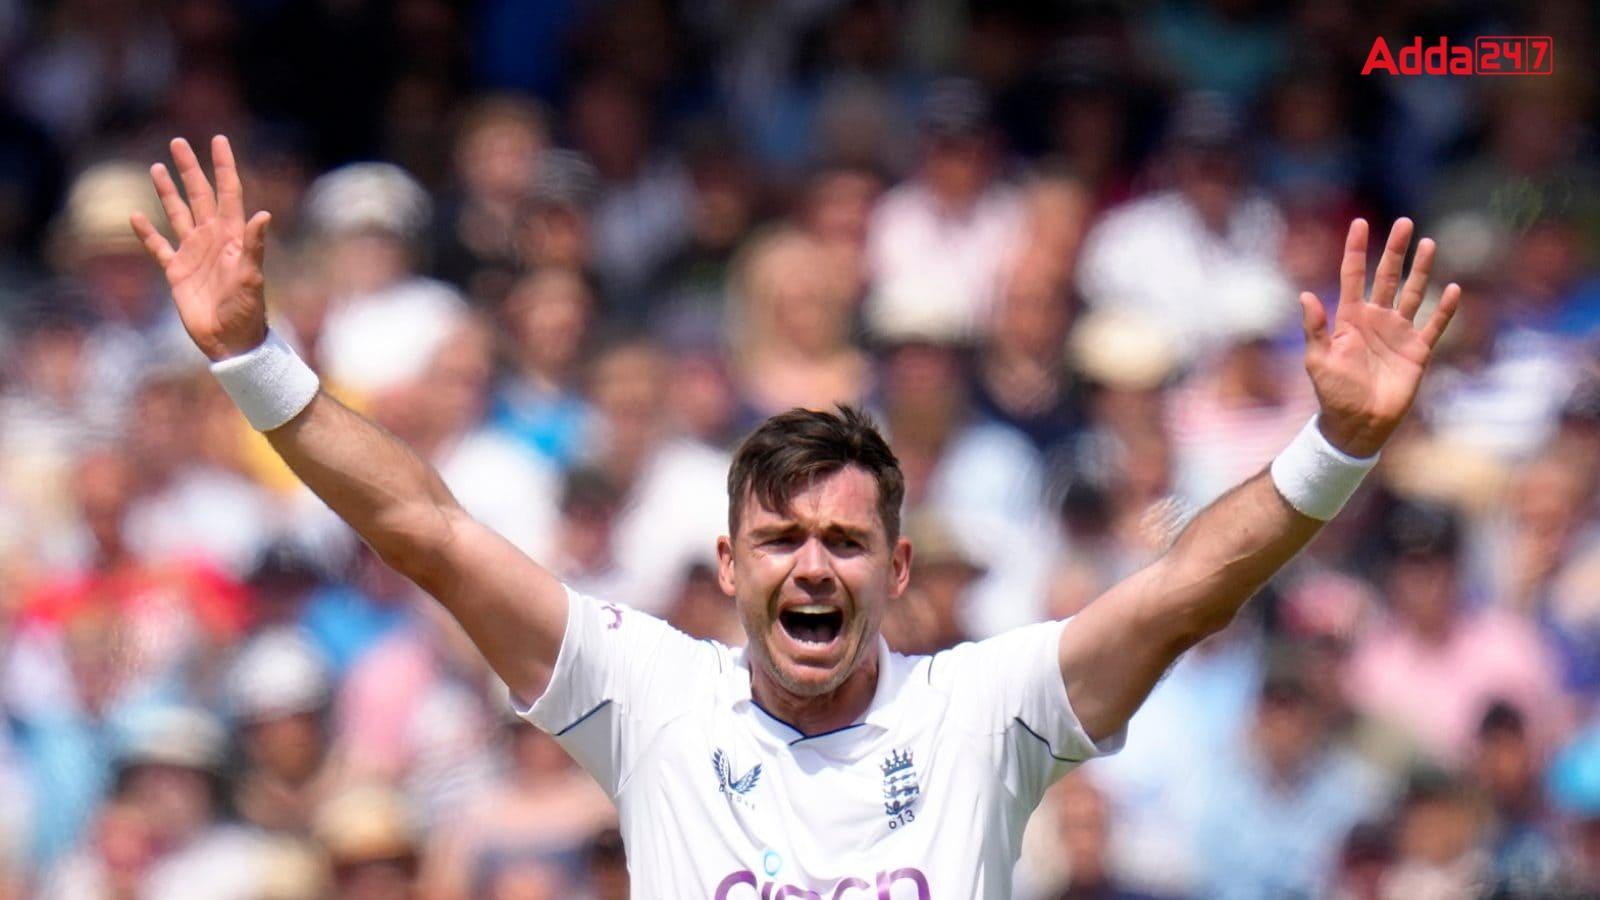 England’s James Anderson becomes most successful pacer in international cricket